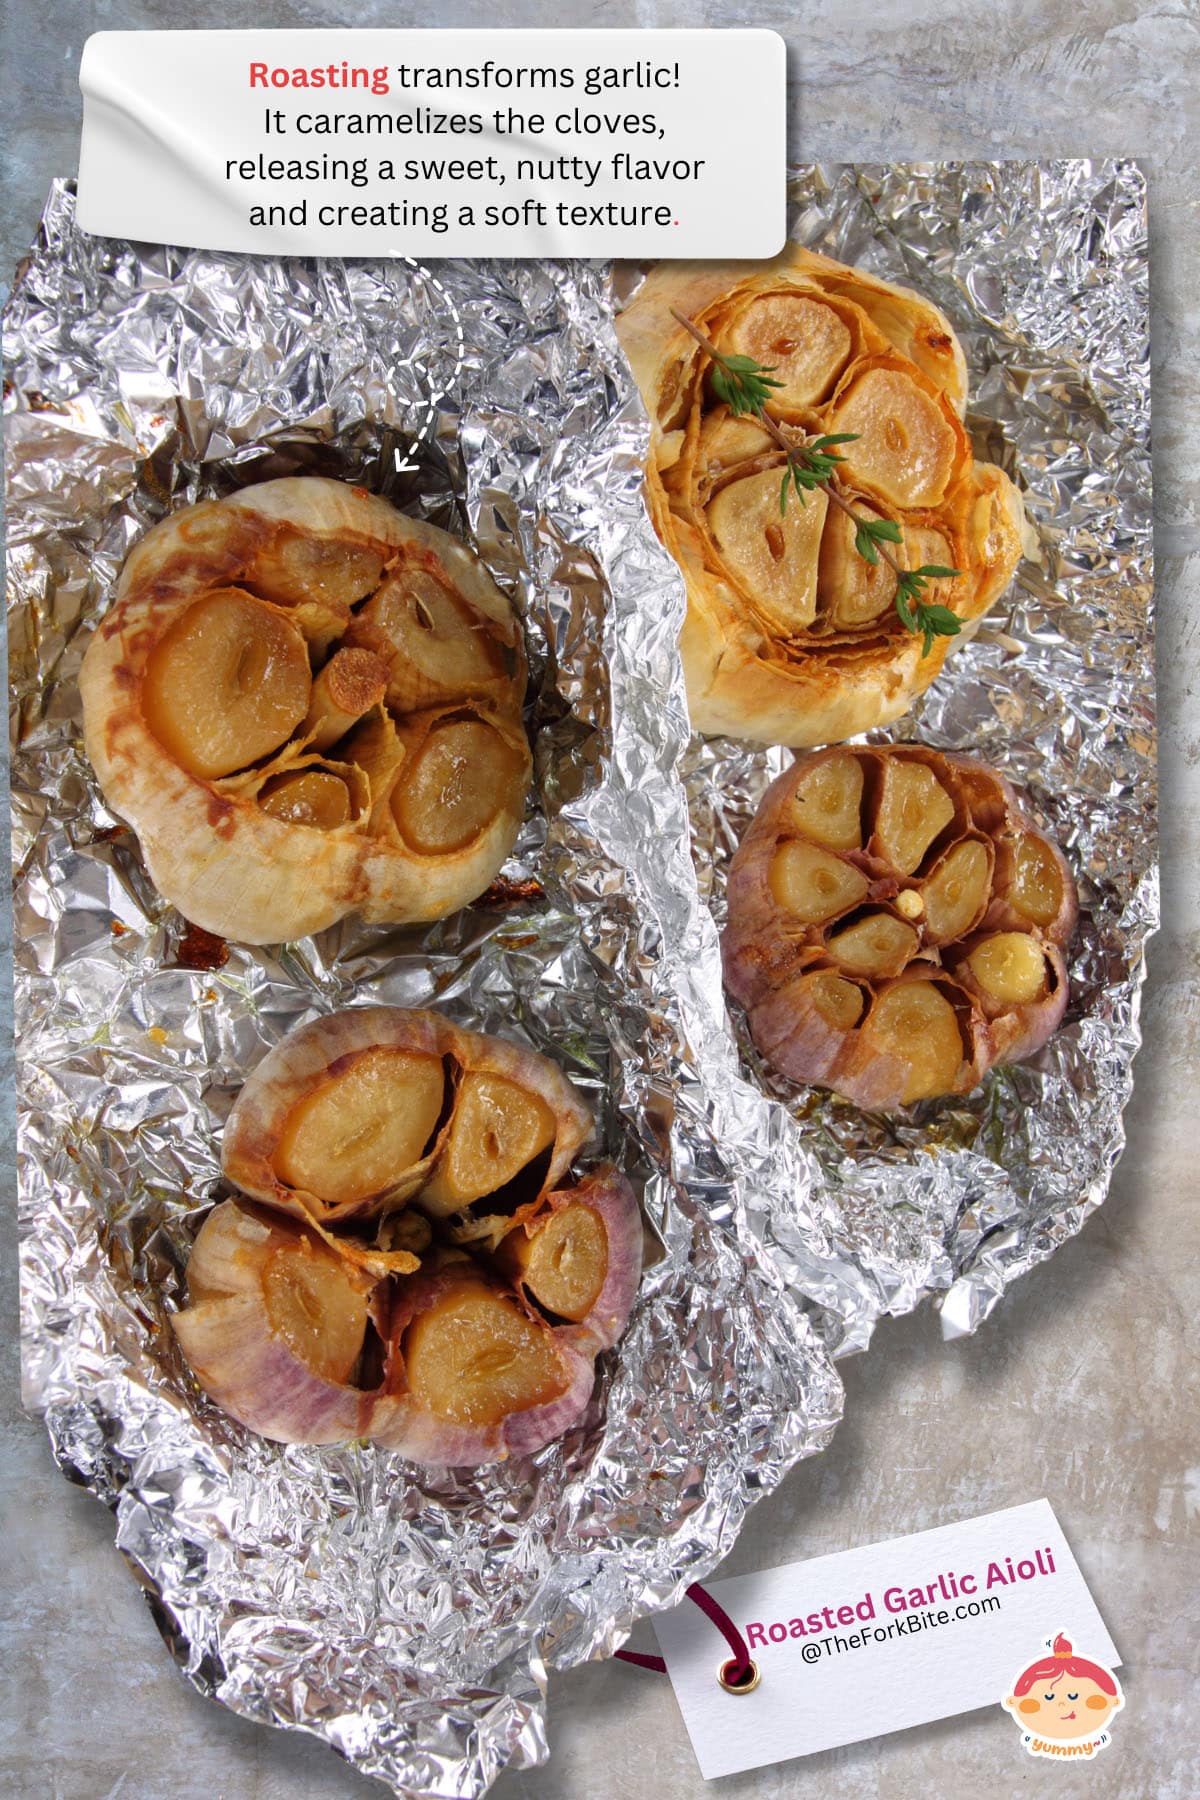 Roasted garlic cloves exposed in an open foil packet, golden brown and slightly steaming.